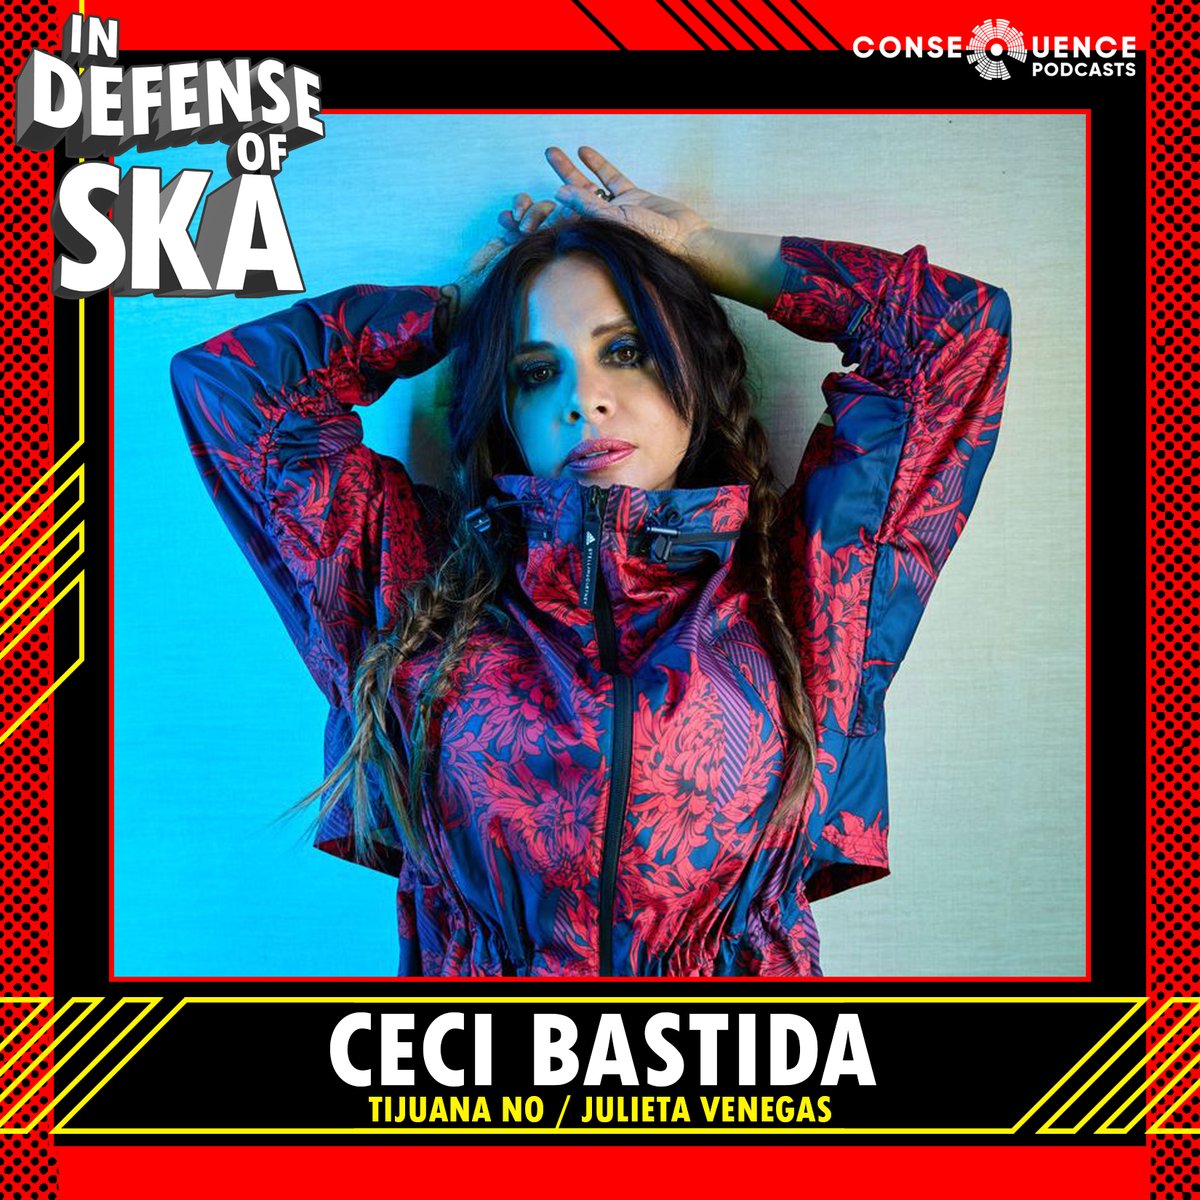 This week, we dig into Tijuana No history with former vocalist/keyboardist Ceci Bastida. Tijuana No formed in 1989 and is one of the most important Mexican ska bands of all time. This is a great conversation. We also talk about her solo work and her time with Julieta Venegas